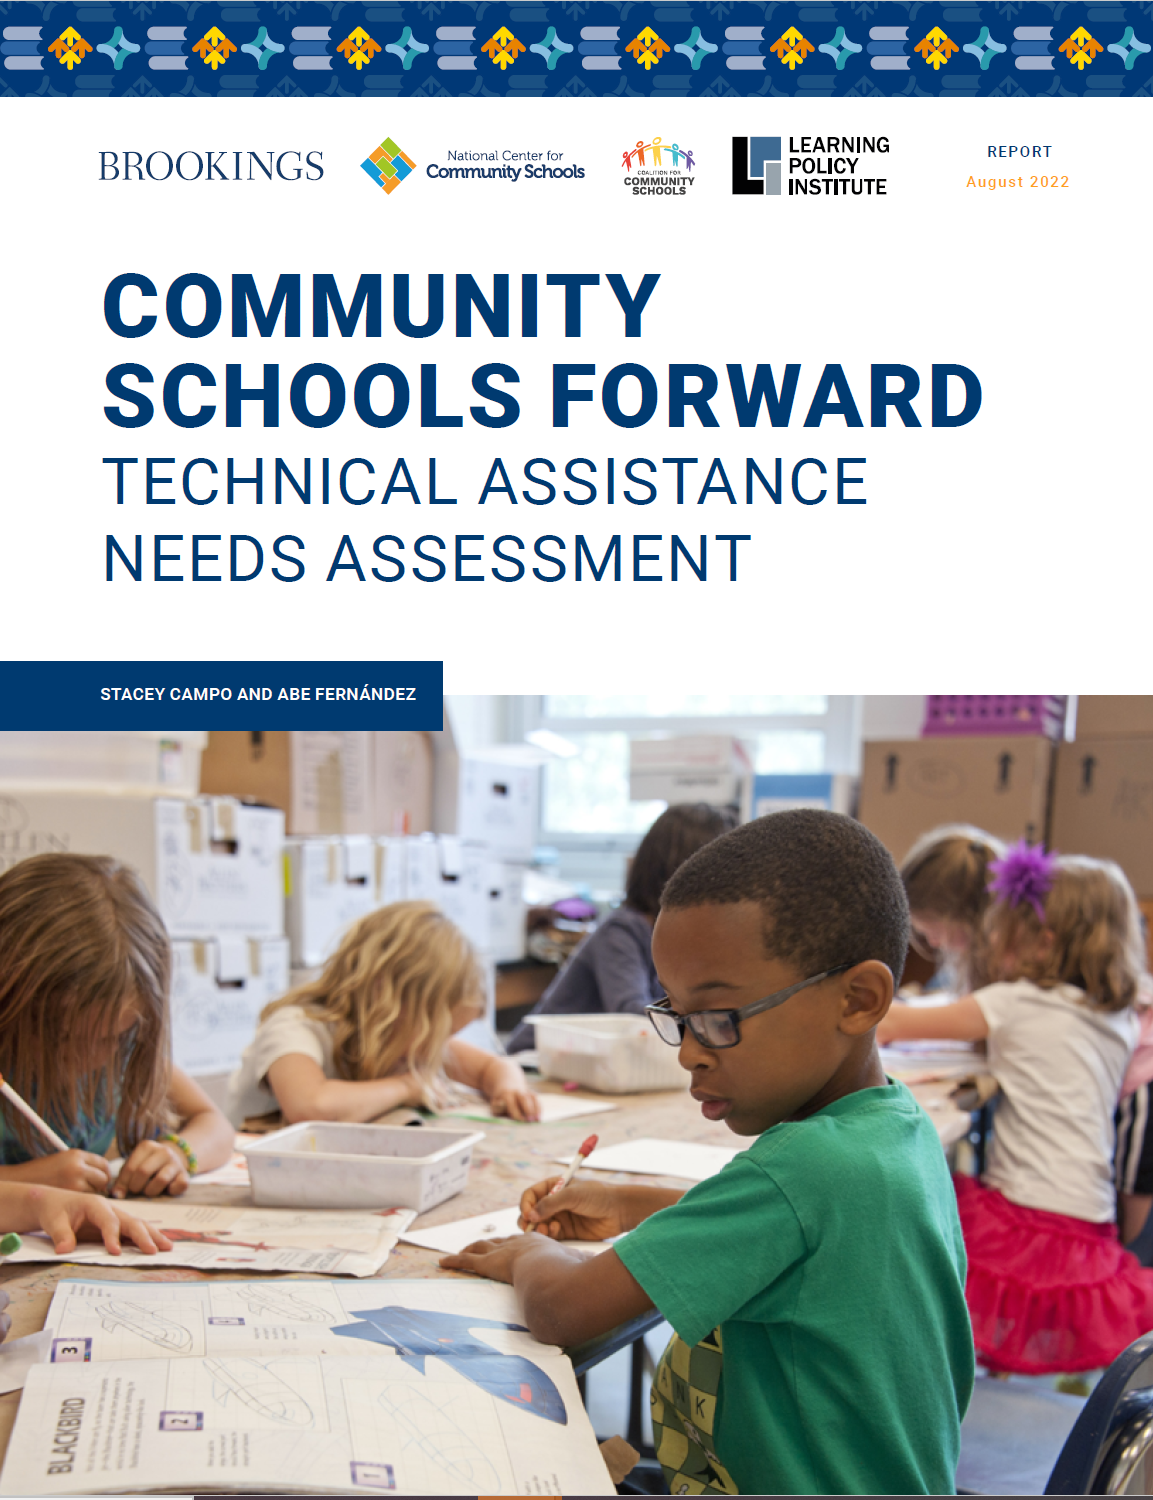 Cover page of the Community Schools Forward: Techincal Assistance Needs Assessment. This report was published as part of the Community Schools Forward project. This project is a collaboration between the Center for Universal Education at the Brookings Institution (CUE), the Children’s Aid National Center for Community Schools (NCCS), the Coalition for Community Schools at IEL (CCS), and the Learning Policy Institute (LPI). Cover includes a picture of children learning.